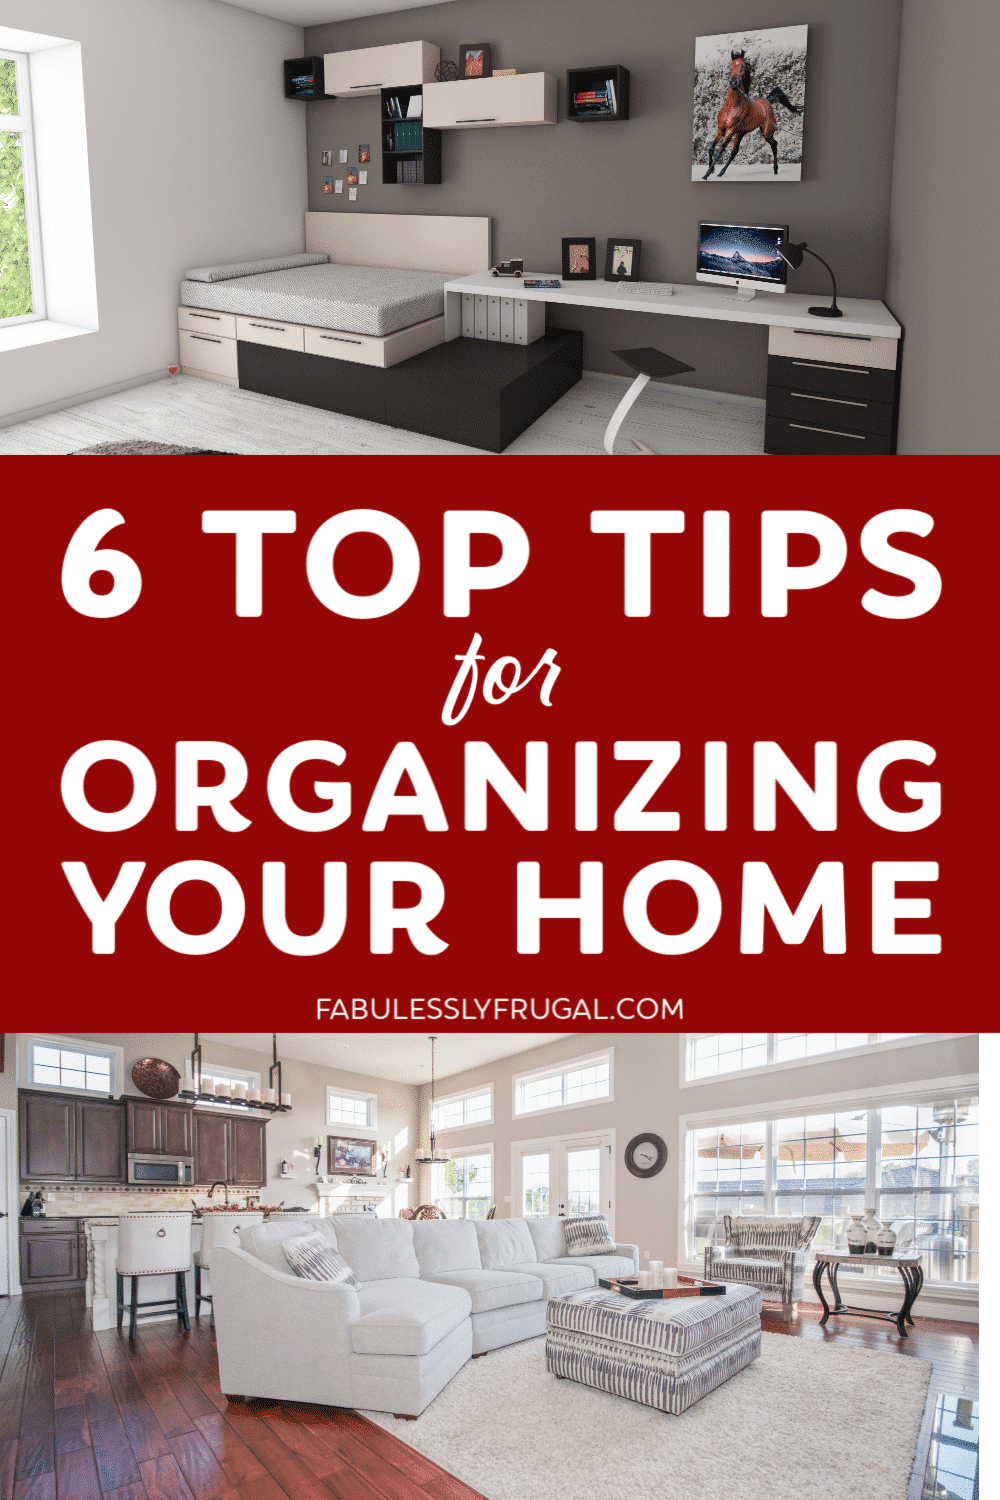 Organizing your home